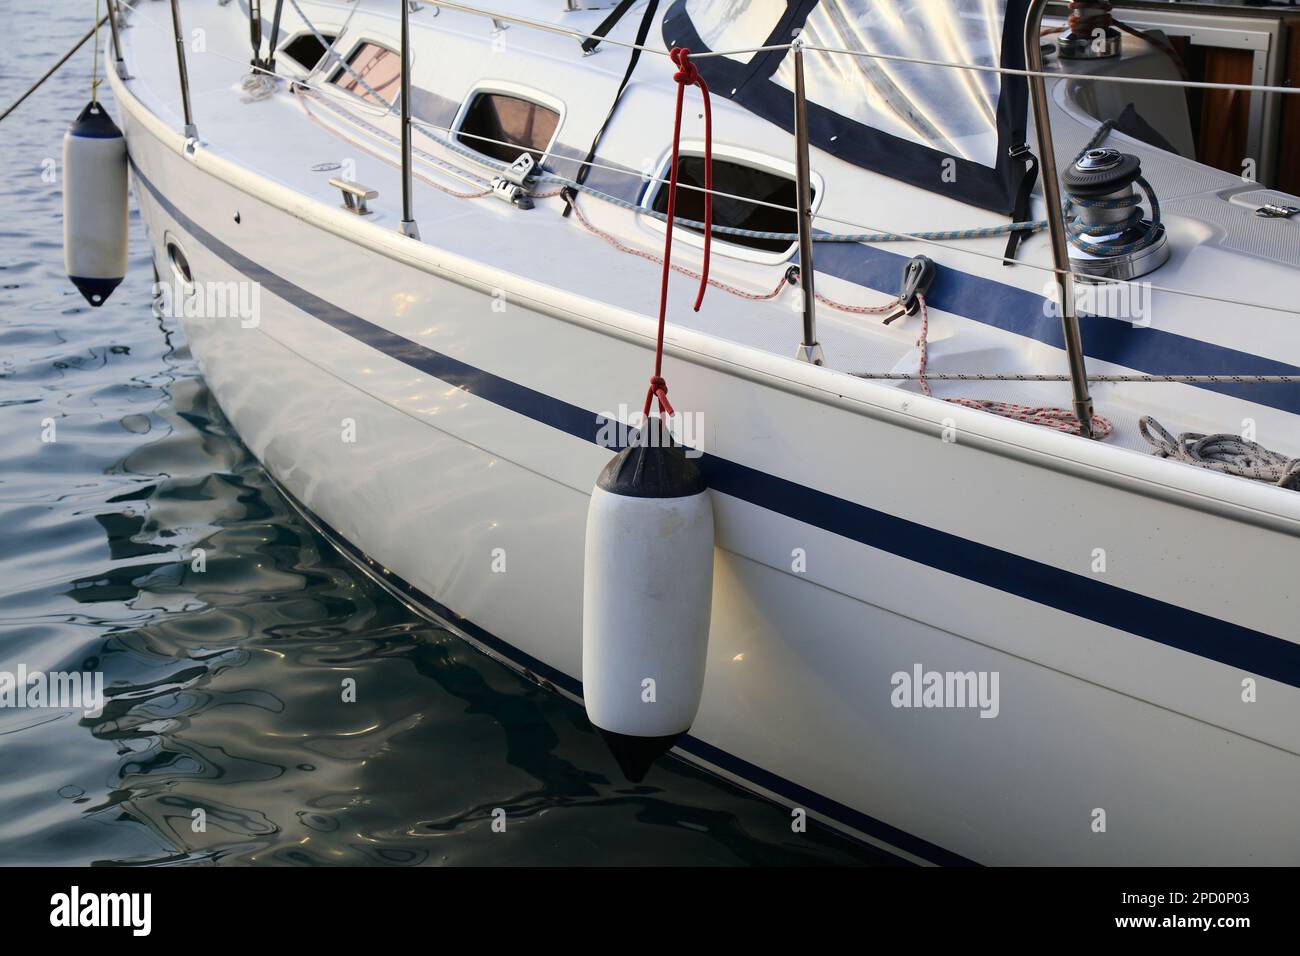 Sailing in Dubrovnik, Croatia. Sailing yacht fenders on port side. Inflatable fender buoys. Stock Photo